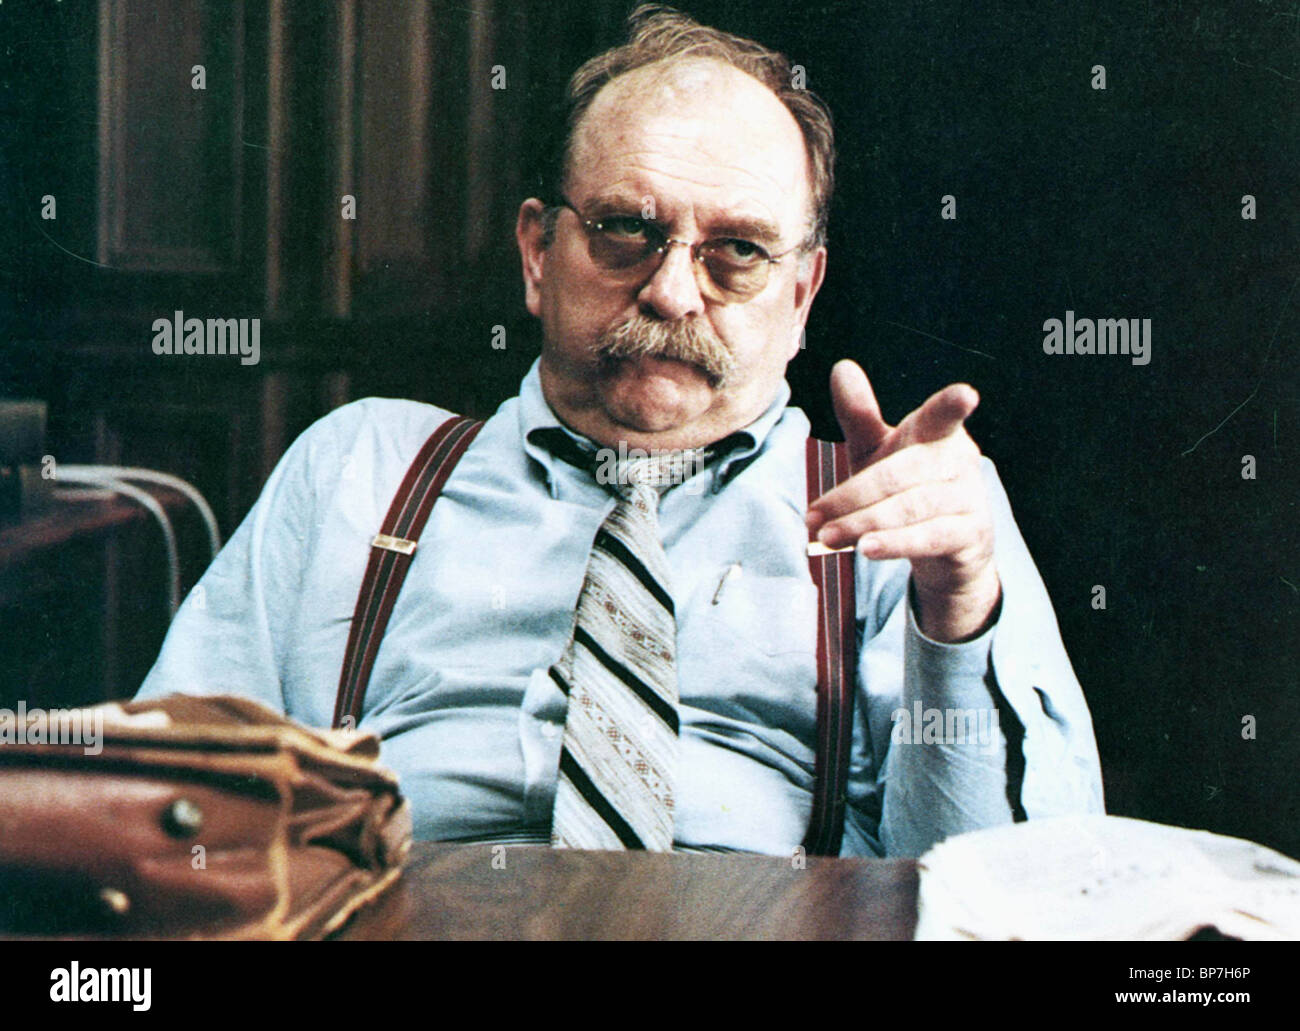 [Image: wilford-brimley-absence-of-malice-1981-BP7H6P.jpg]